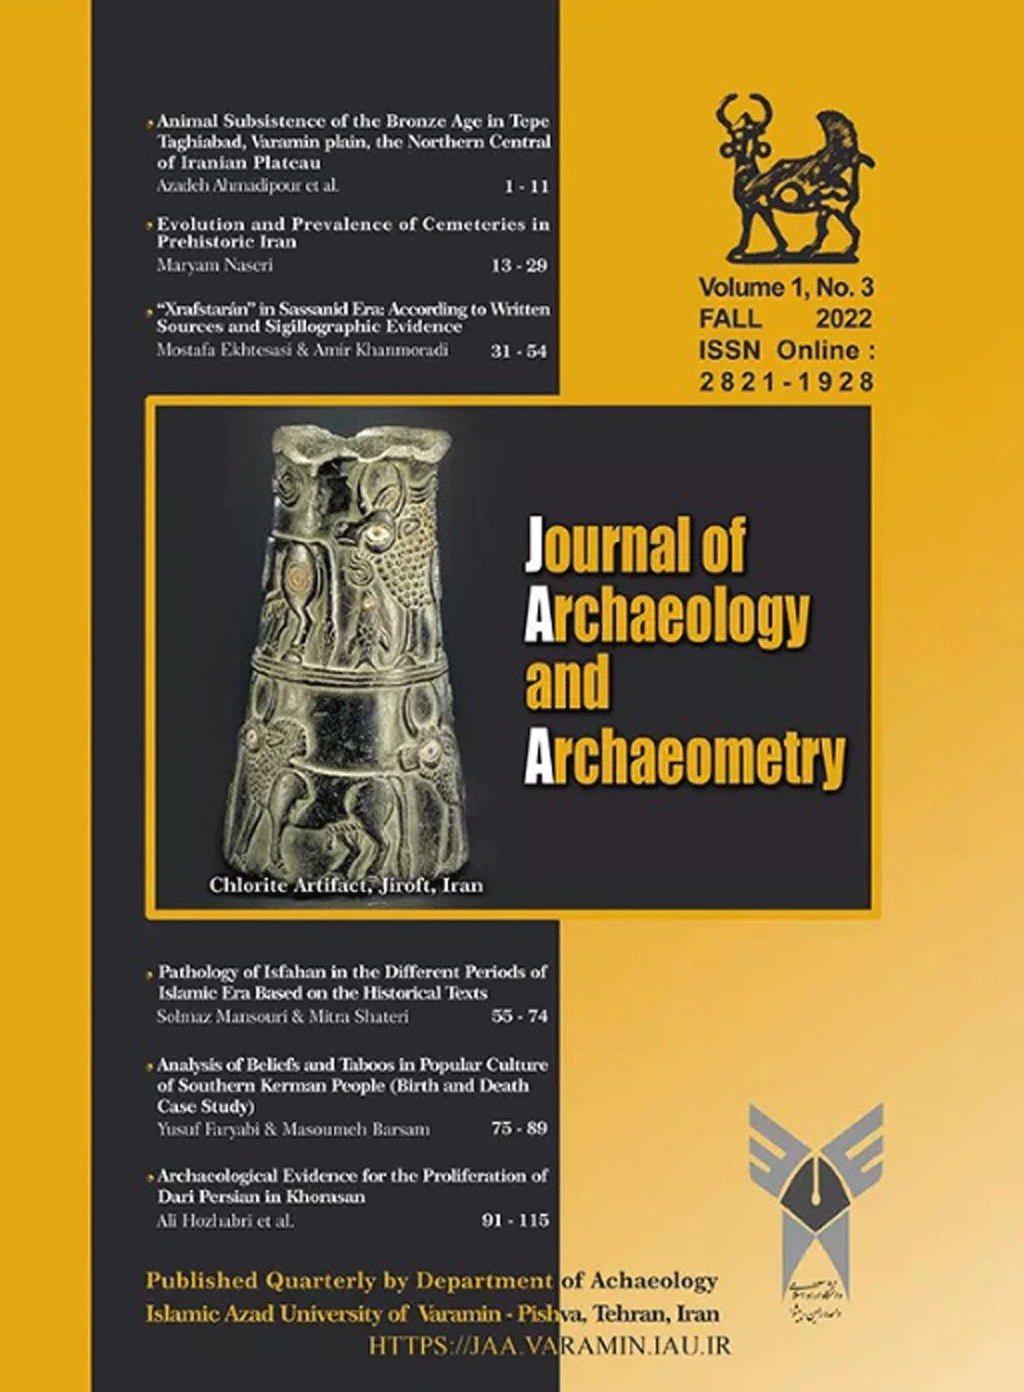 Archeology and Archaeometry - December 2022,  Volume 1 - Number 3